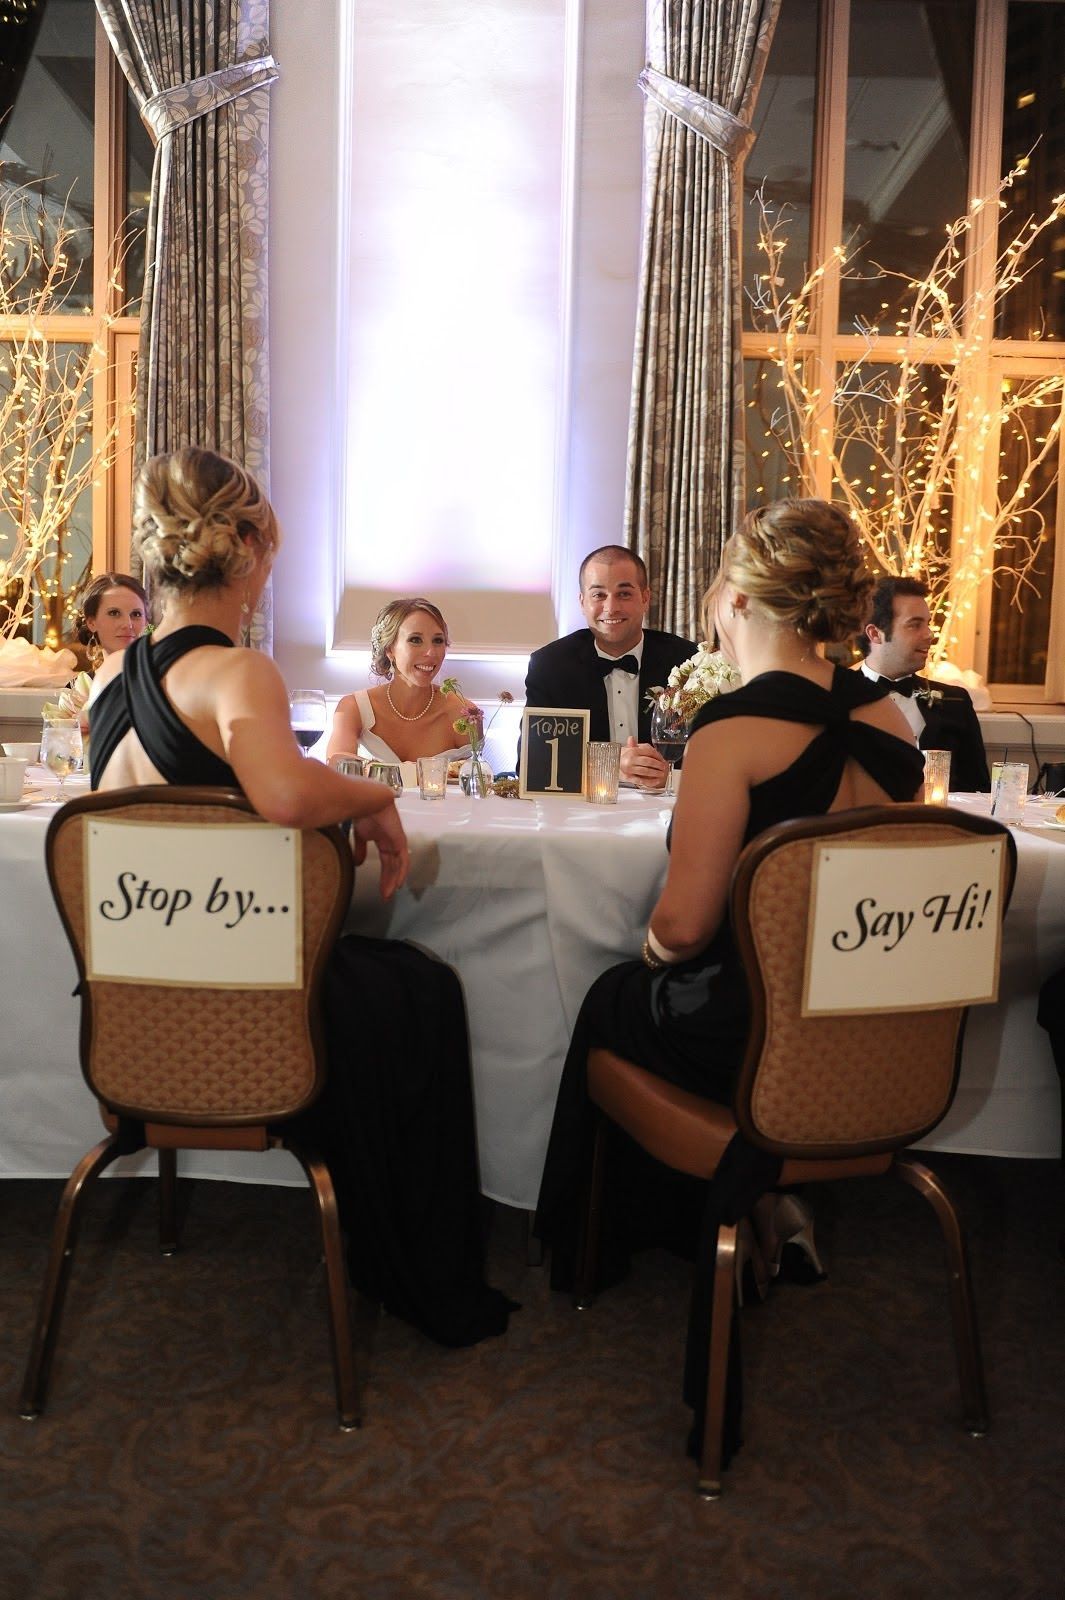 Love this idea!  Having empty chairs across from the bride and groom is a Scandi